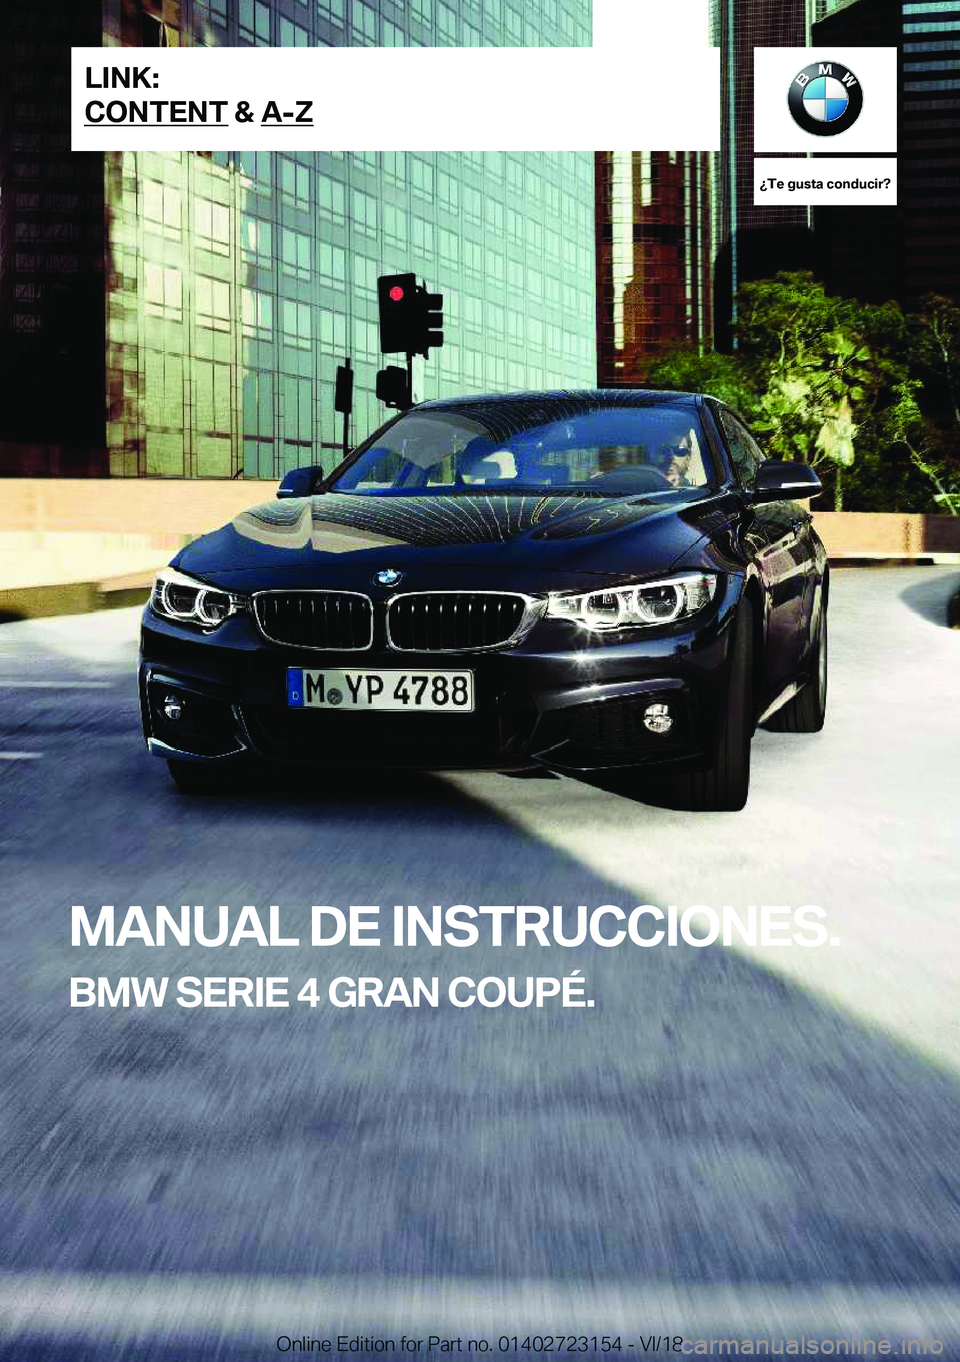 BMW 4 SERIES GRAN COUPE 2019  Manuales de Empleo (in Spanish) ��T�e��g�u�s�t�a��c�o�n�d�u�c�i�r� 
�M�A�N�U�A�L��D�E��I�N�S�T�R�U�C�C�I�O�N�E�S�.
�B�M�W��S�E�R�I�E��4��G�R�A�N��C�O�U�P�